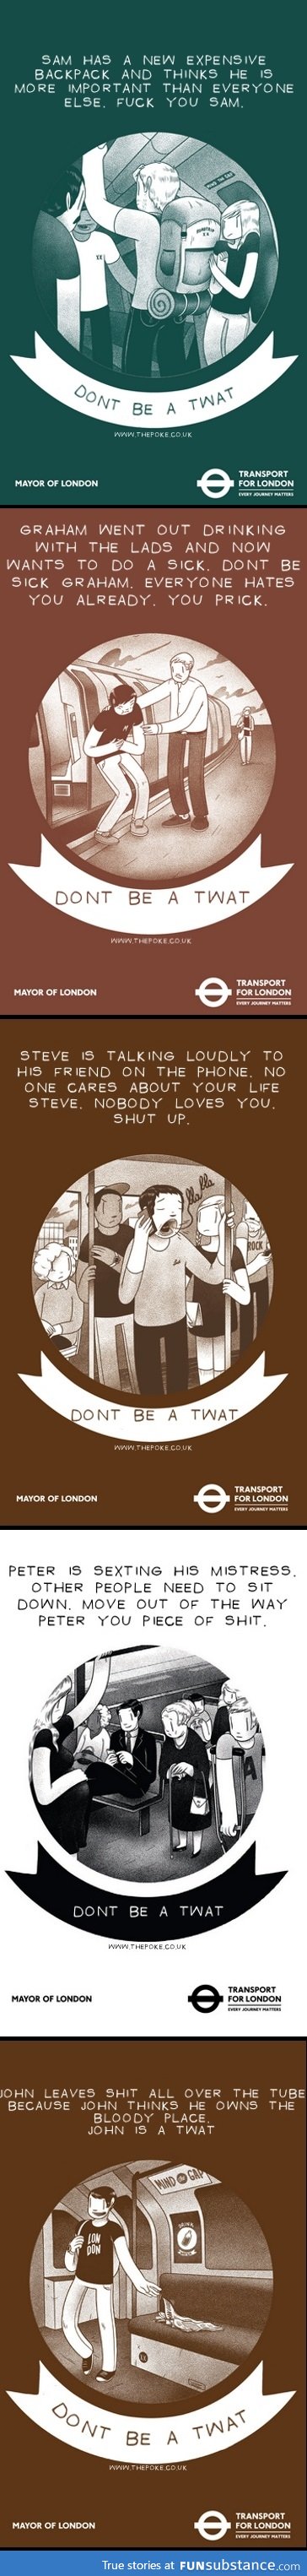 don't be a twat